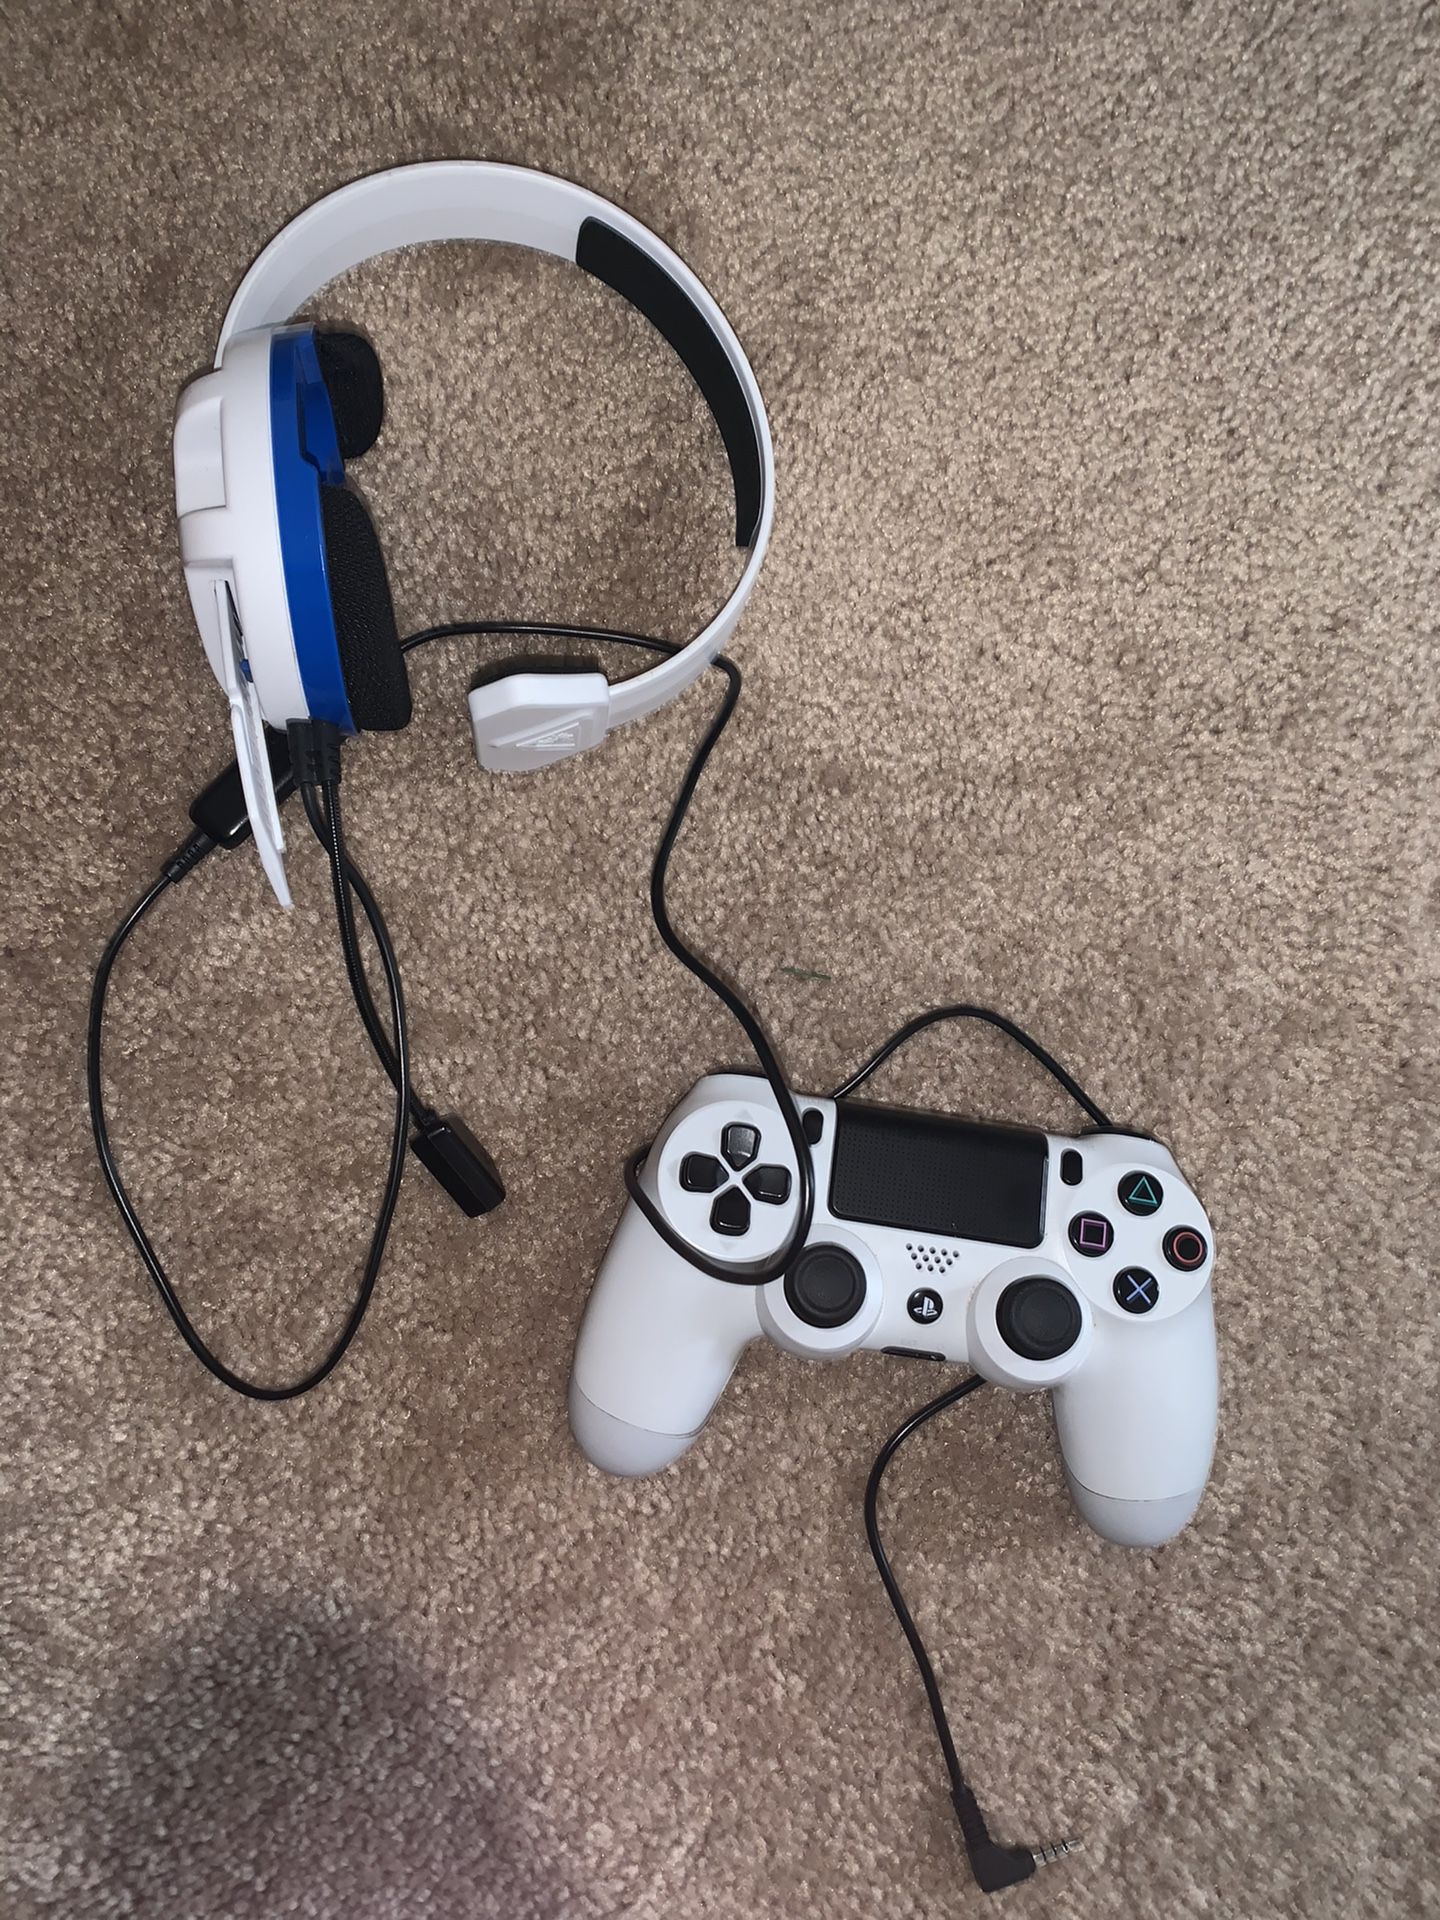 White ps4 controller and turtle beach headset